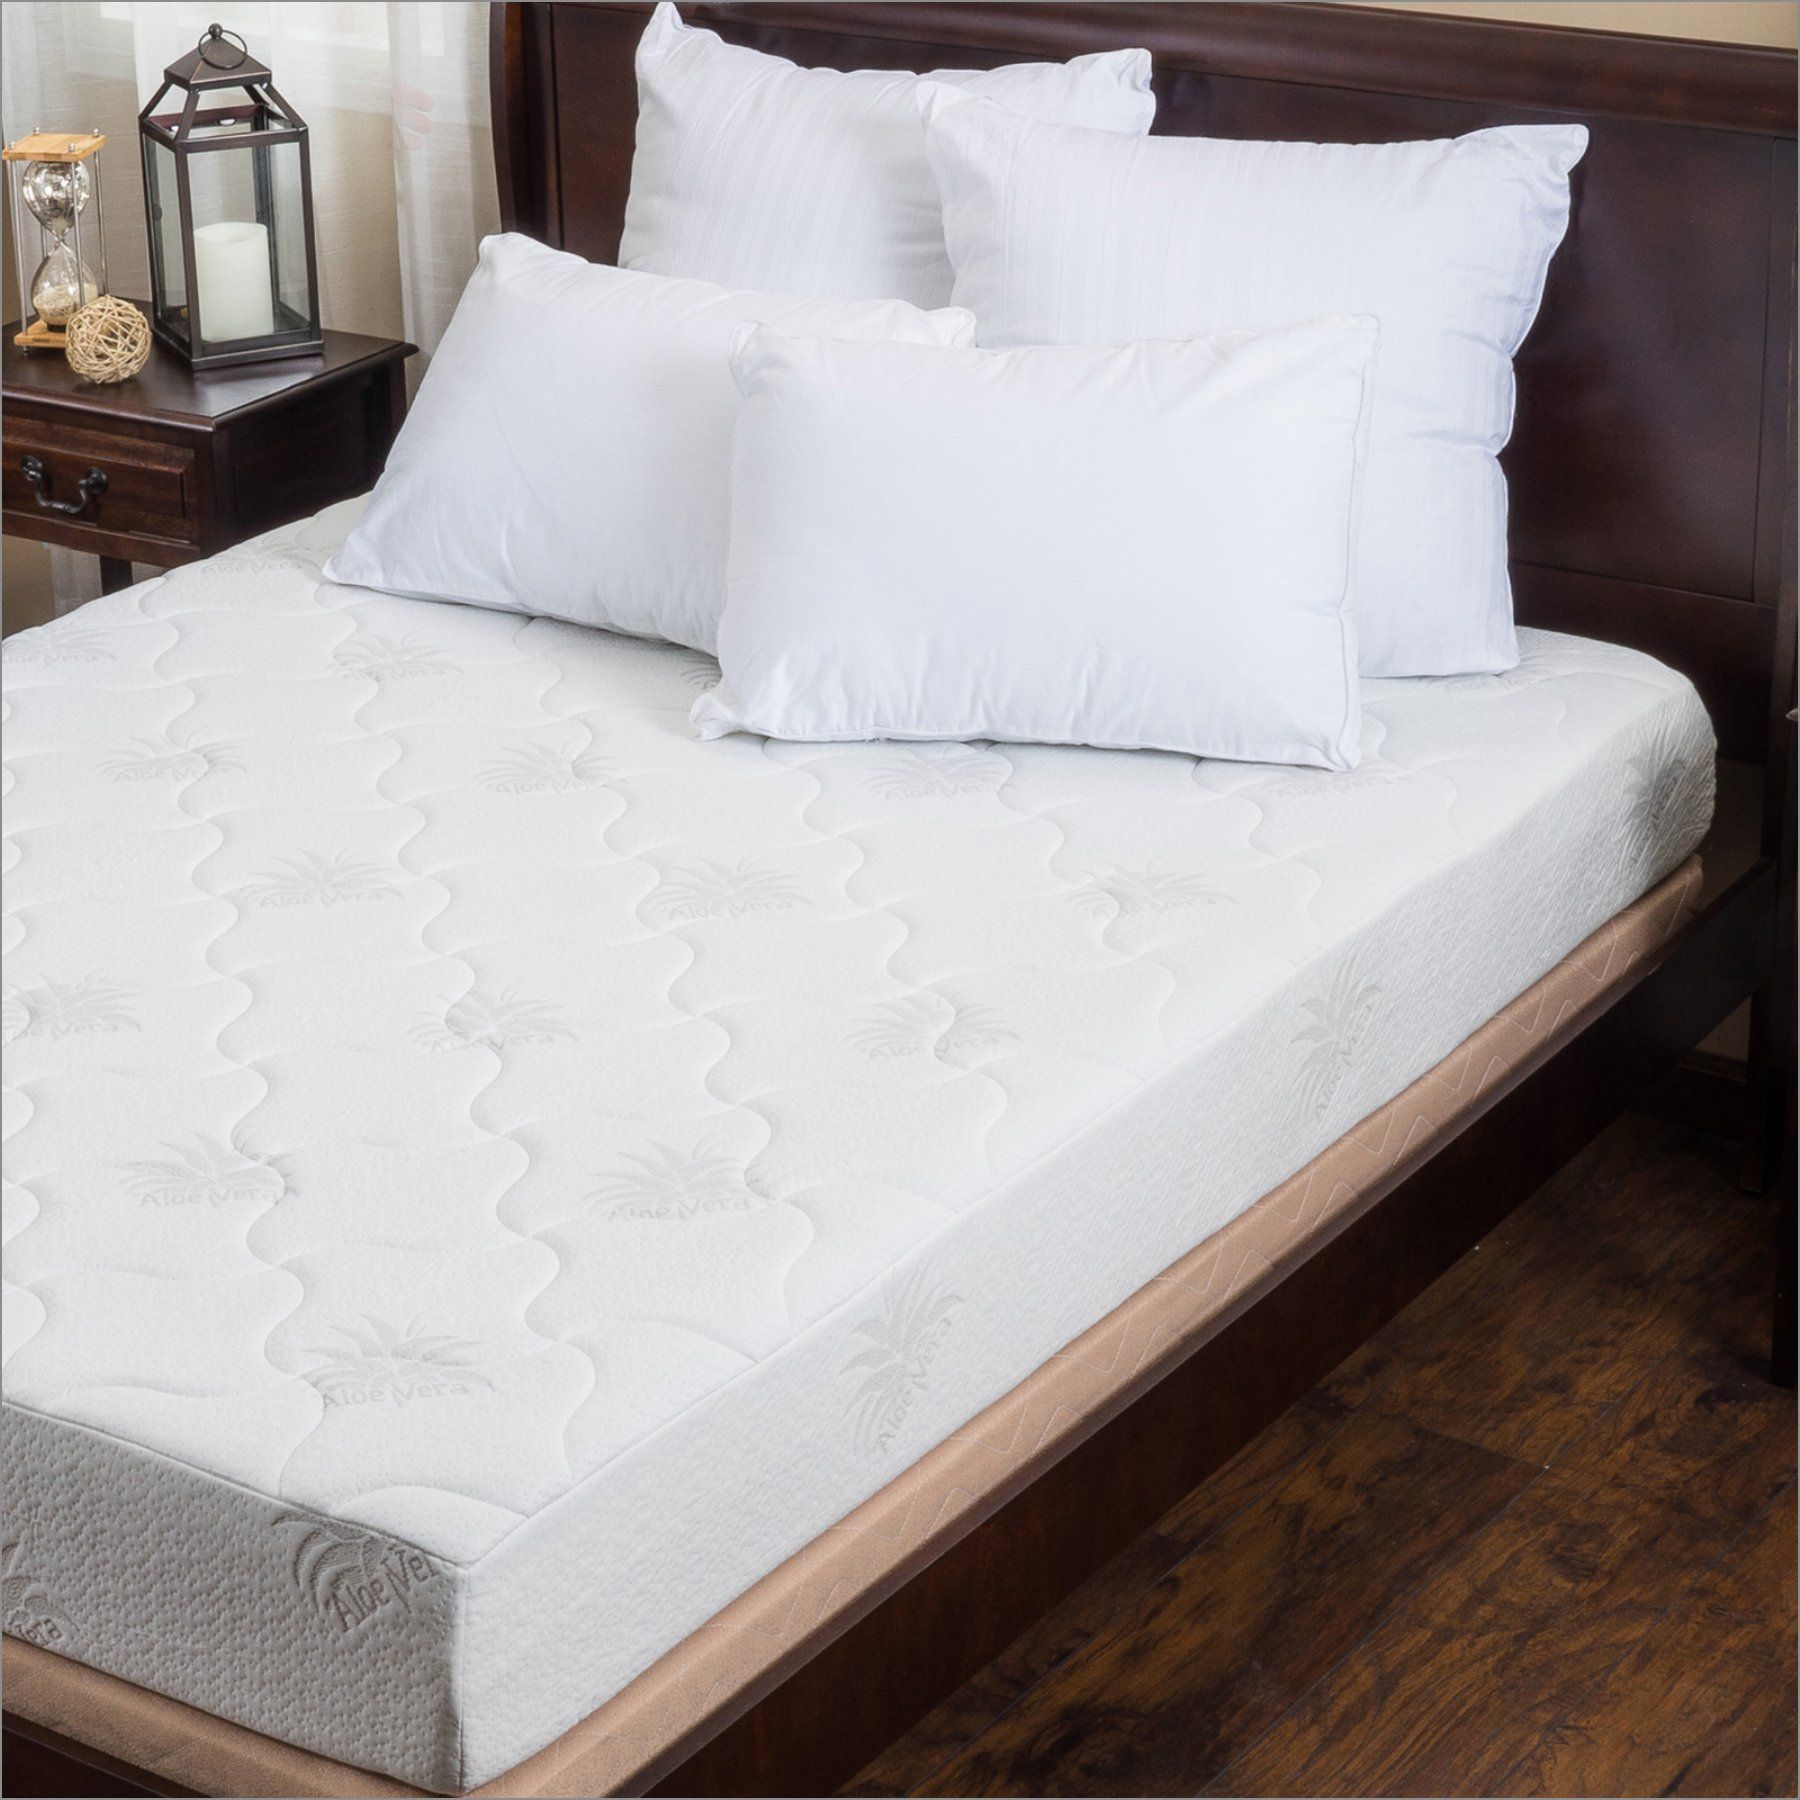 How Much Does A Queen Size Tempurpedic Mattress Cost Check ...